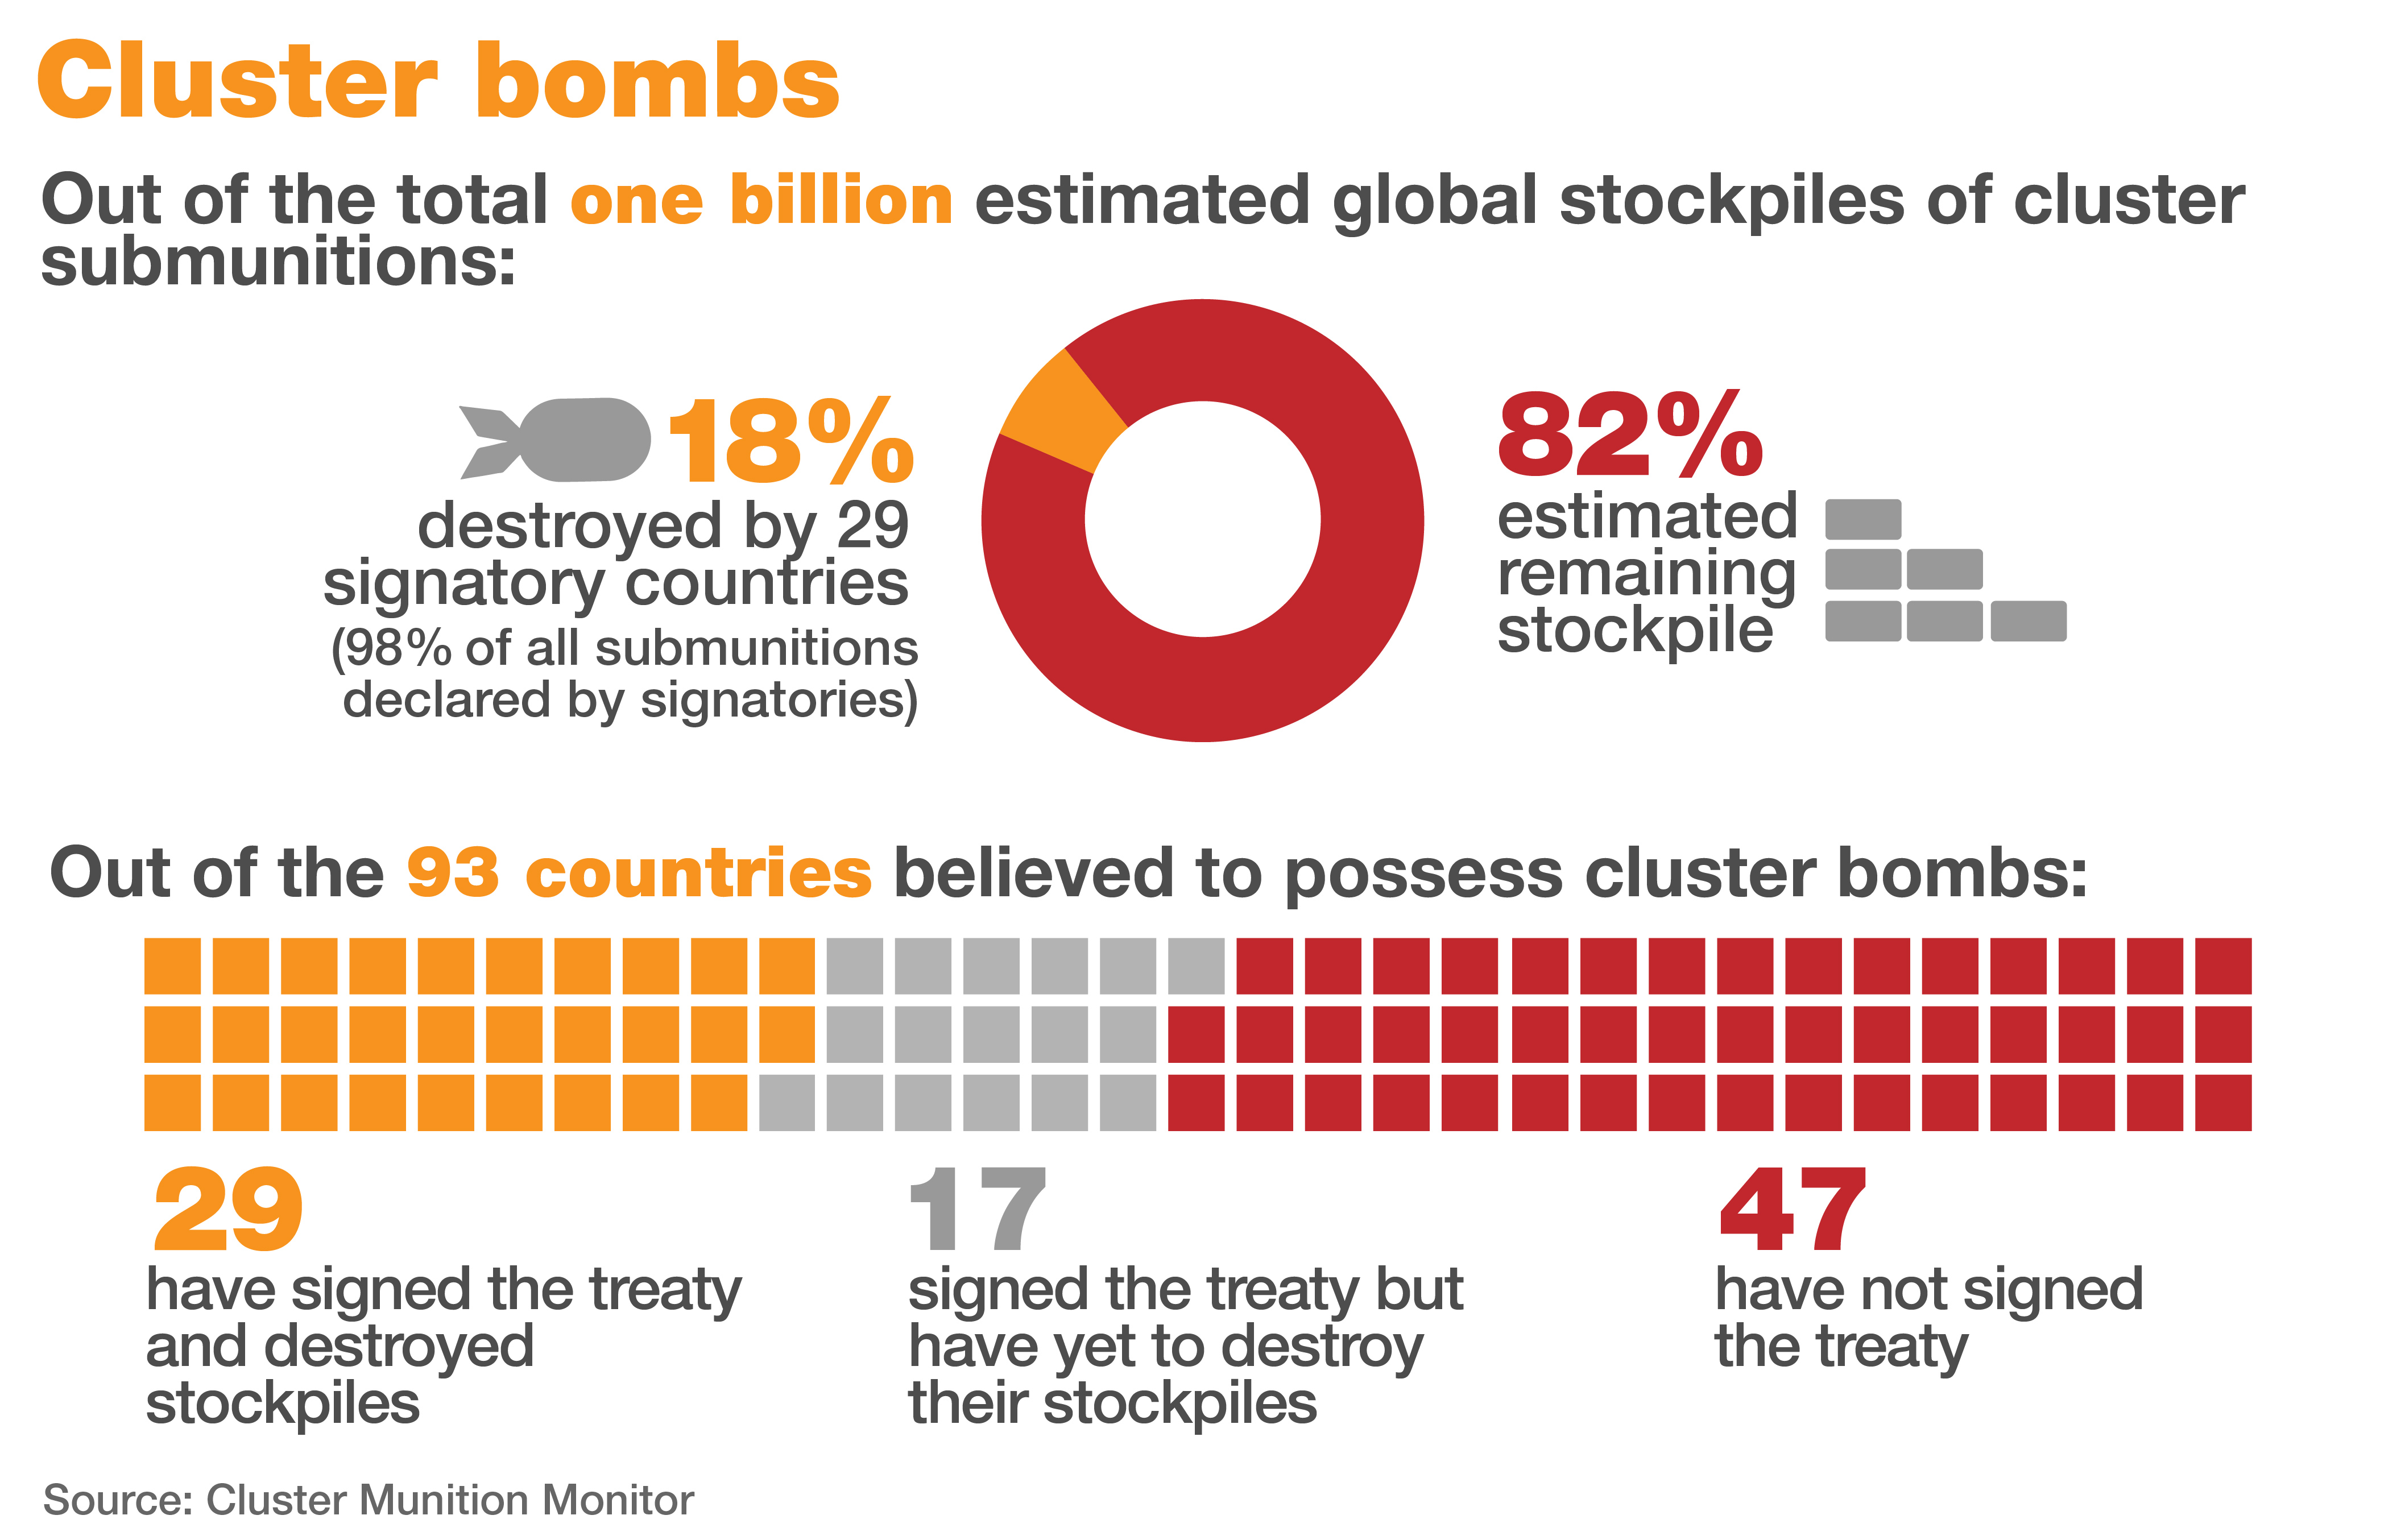 Cluster munition bombs